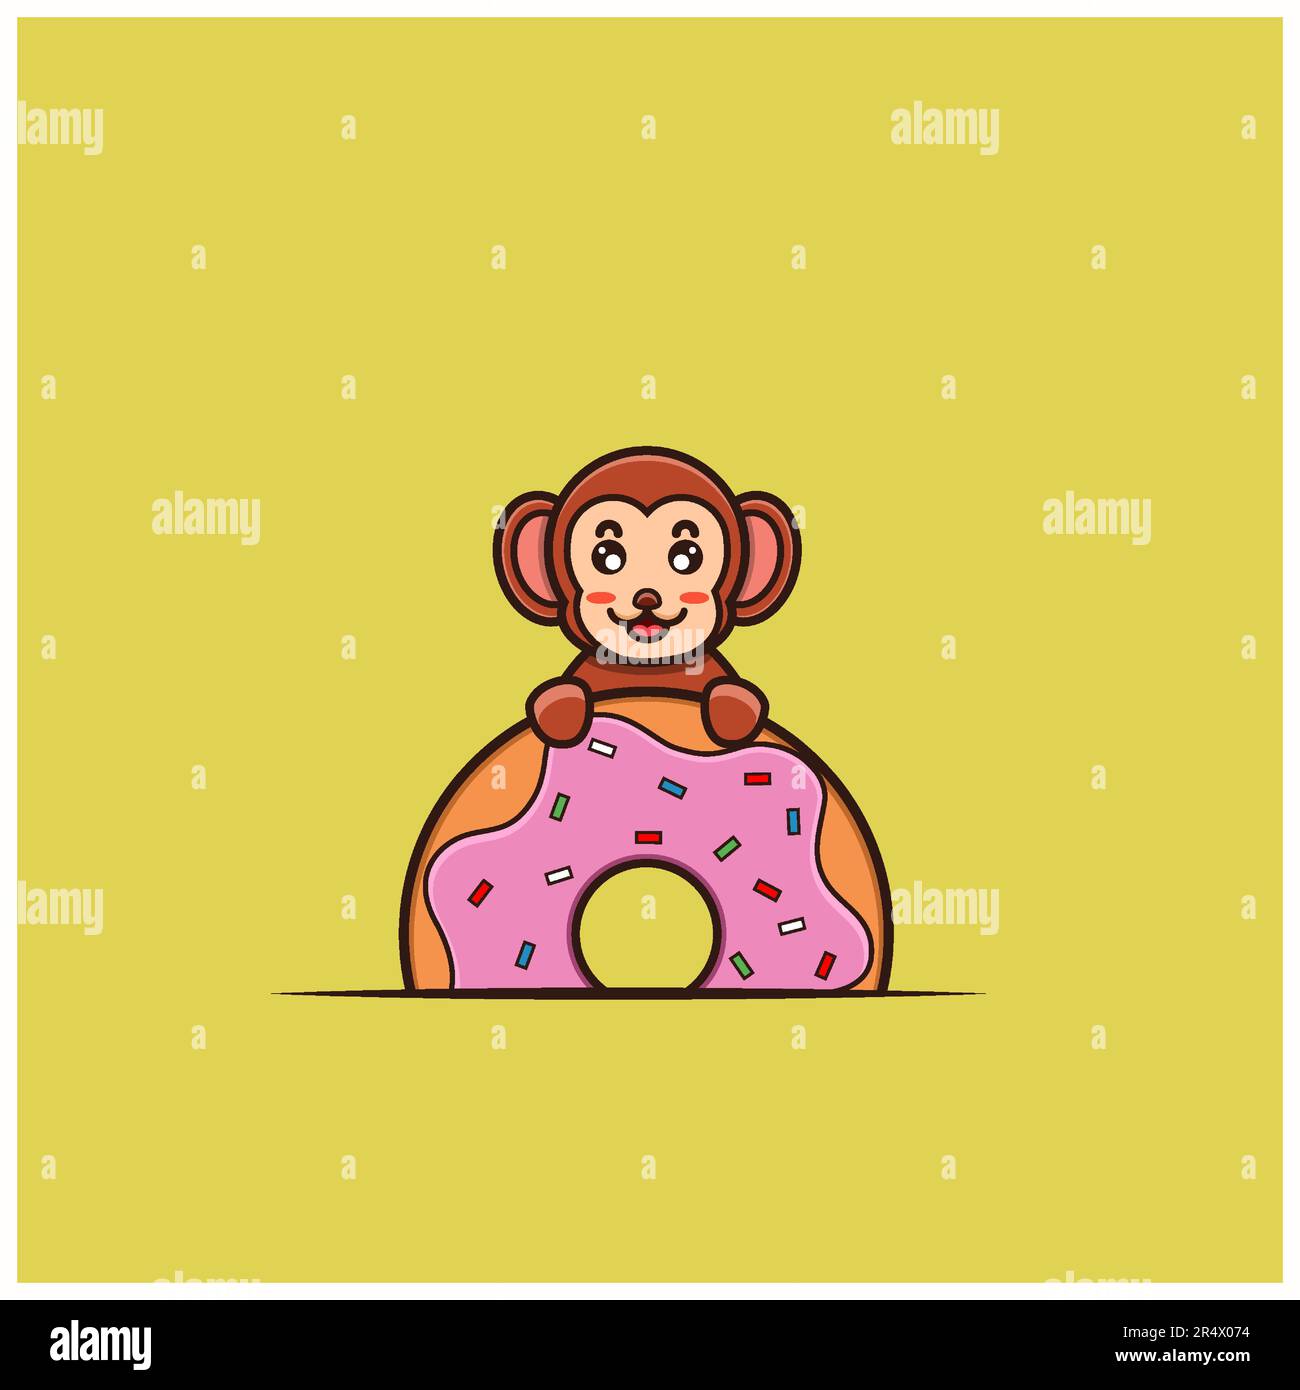 Cute Baby Monkey On Donuts. Character, Mascot, Logo, Cartoon, Icon, and Cute Design. Vector and Illustration. Stock Vector